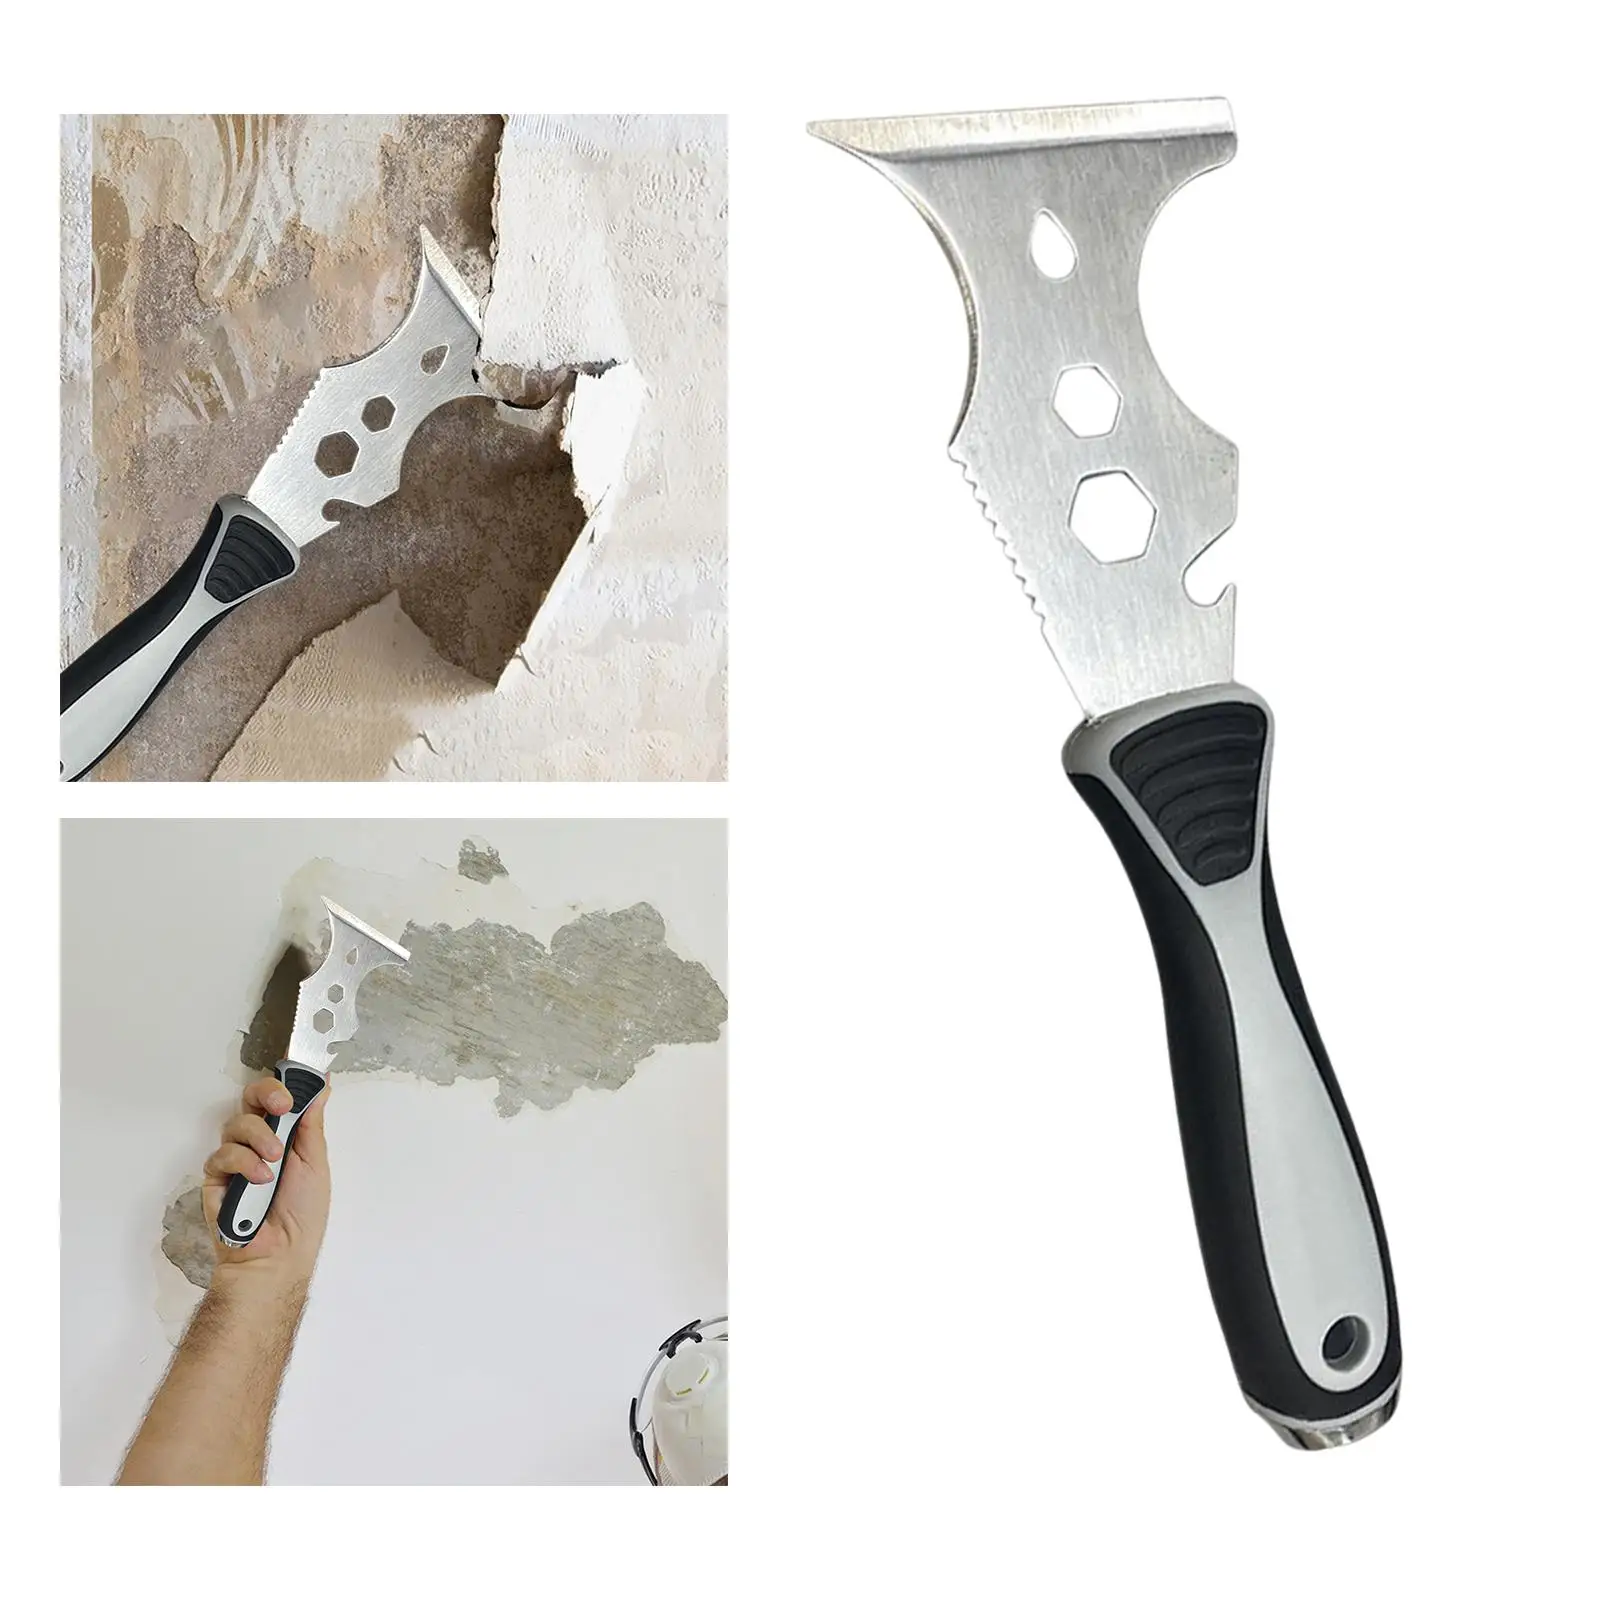 Multifunctional Scraper Tool Wallpaper Scraper Paint Remover Stainless Steel Putty Knife for Home Decoration Repair